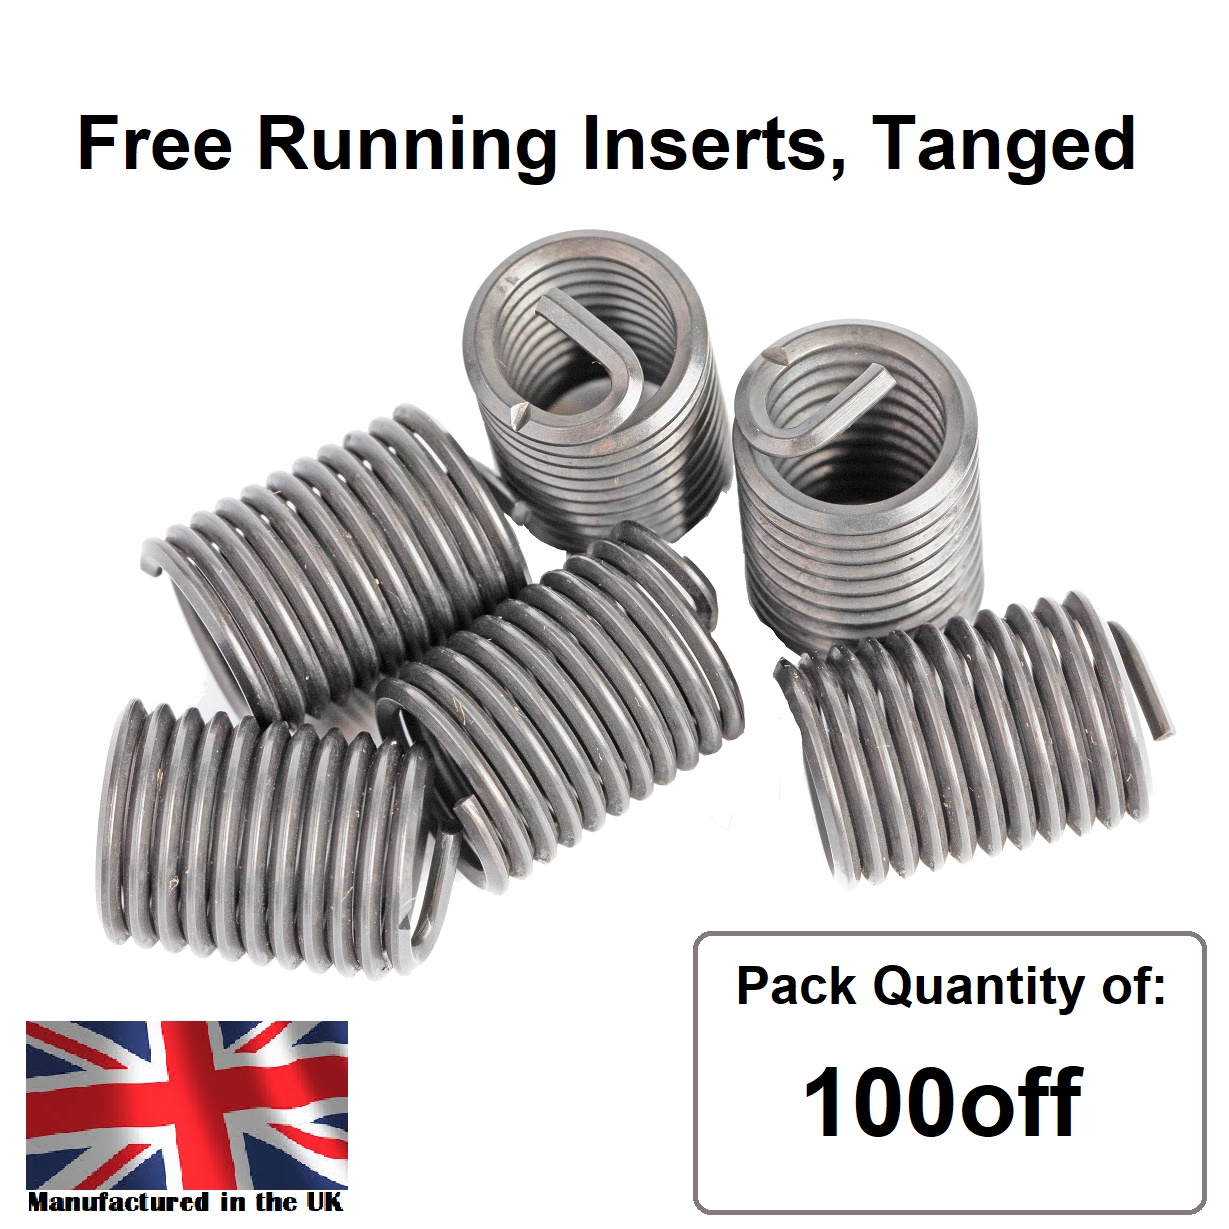 M3 x 0.5 x 2D Metric Coarse, Free Running, Tanged, Wire Thread Repair Insert, 304/A2 Stainless (Pack 100)